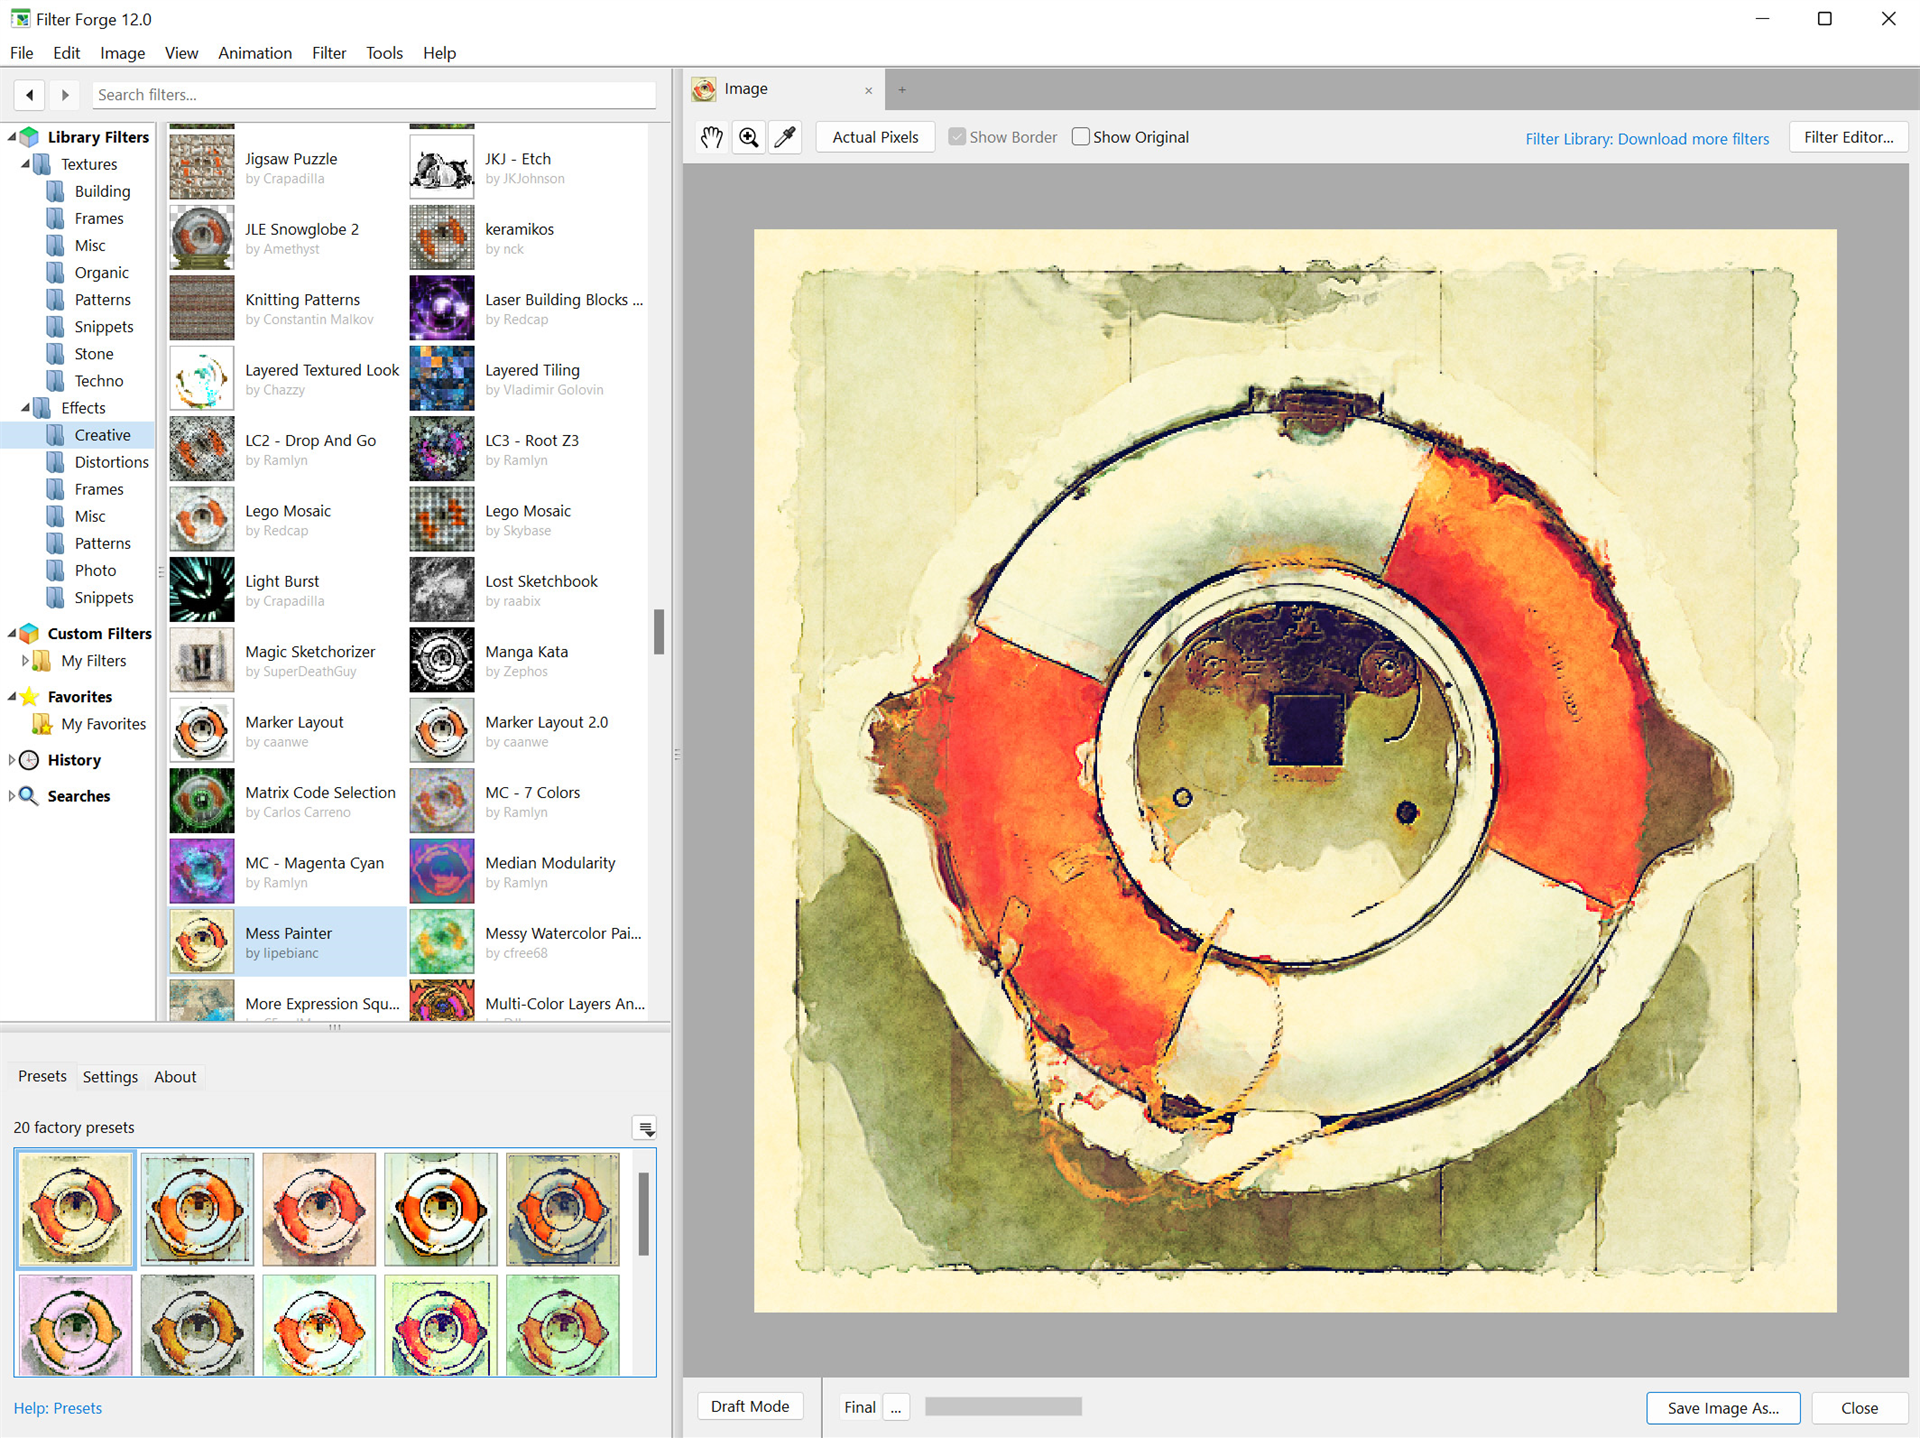 Graphic Design Software, Filter Forge Professional Edition Screenshot